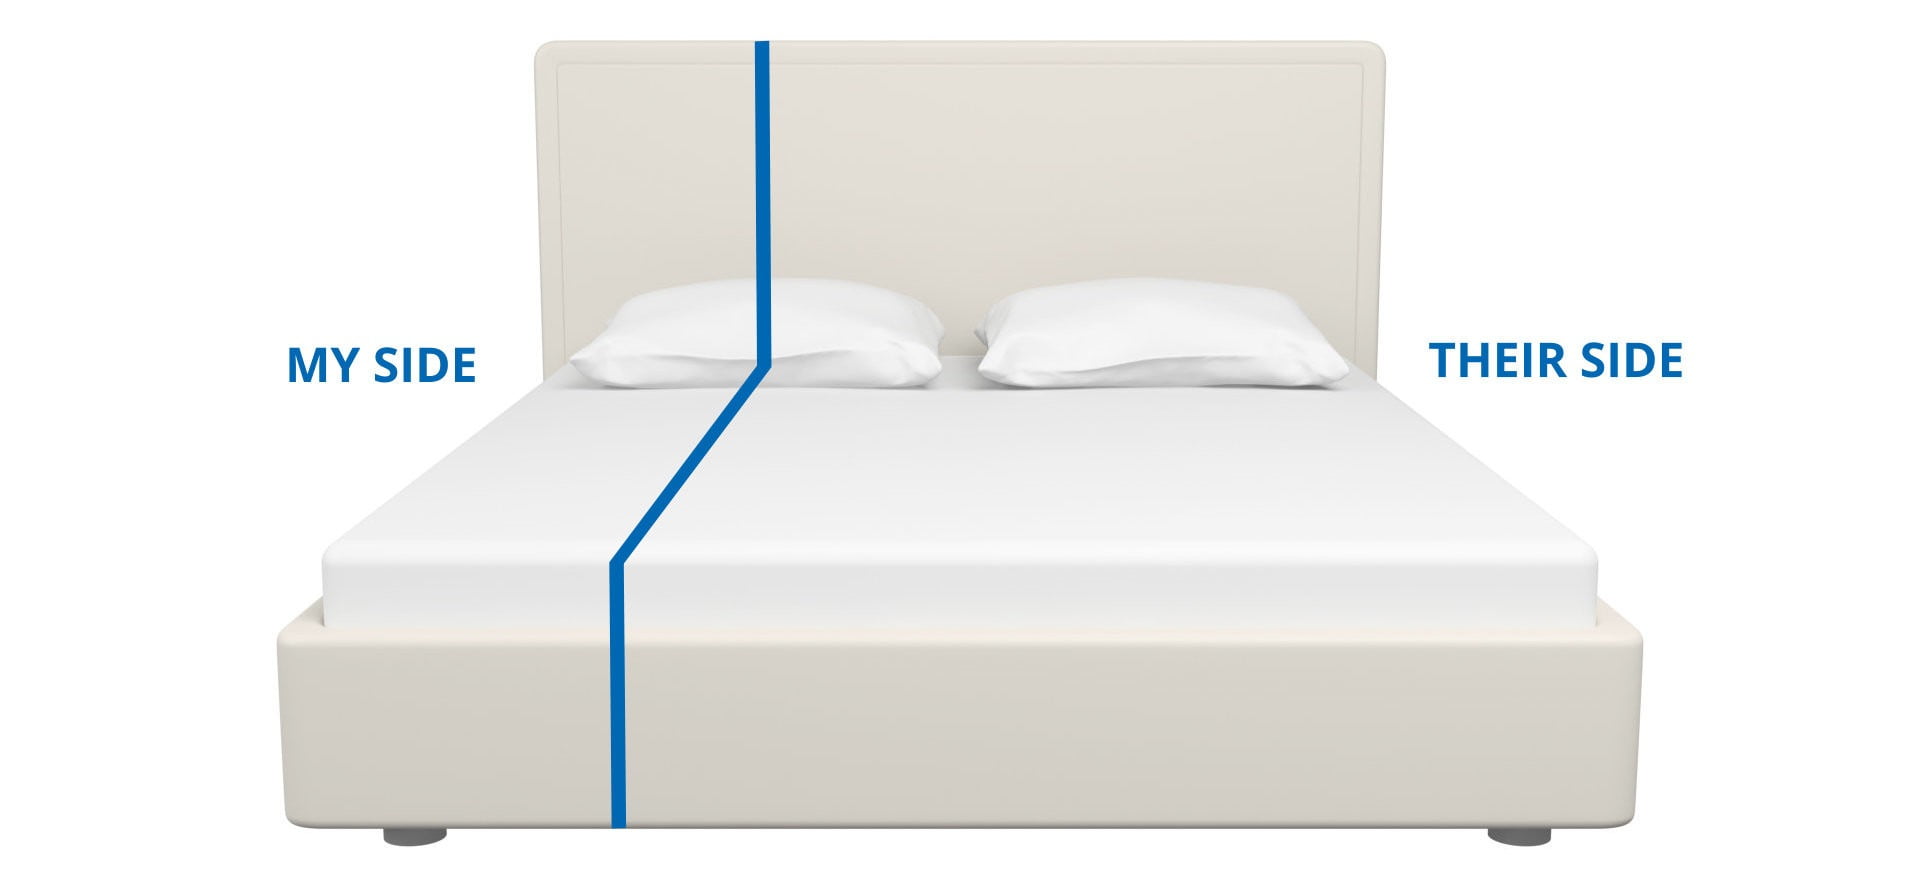 Bed Advice UK Bed Sizes UK: Bed and Mattress Size Guide 